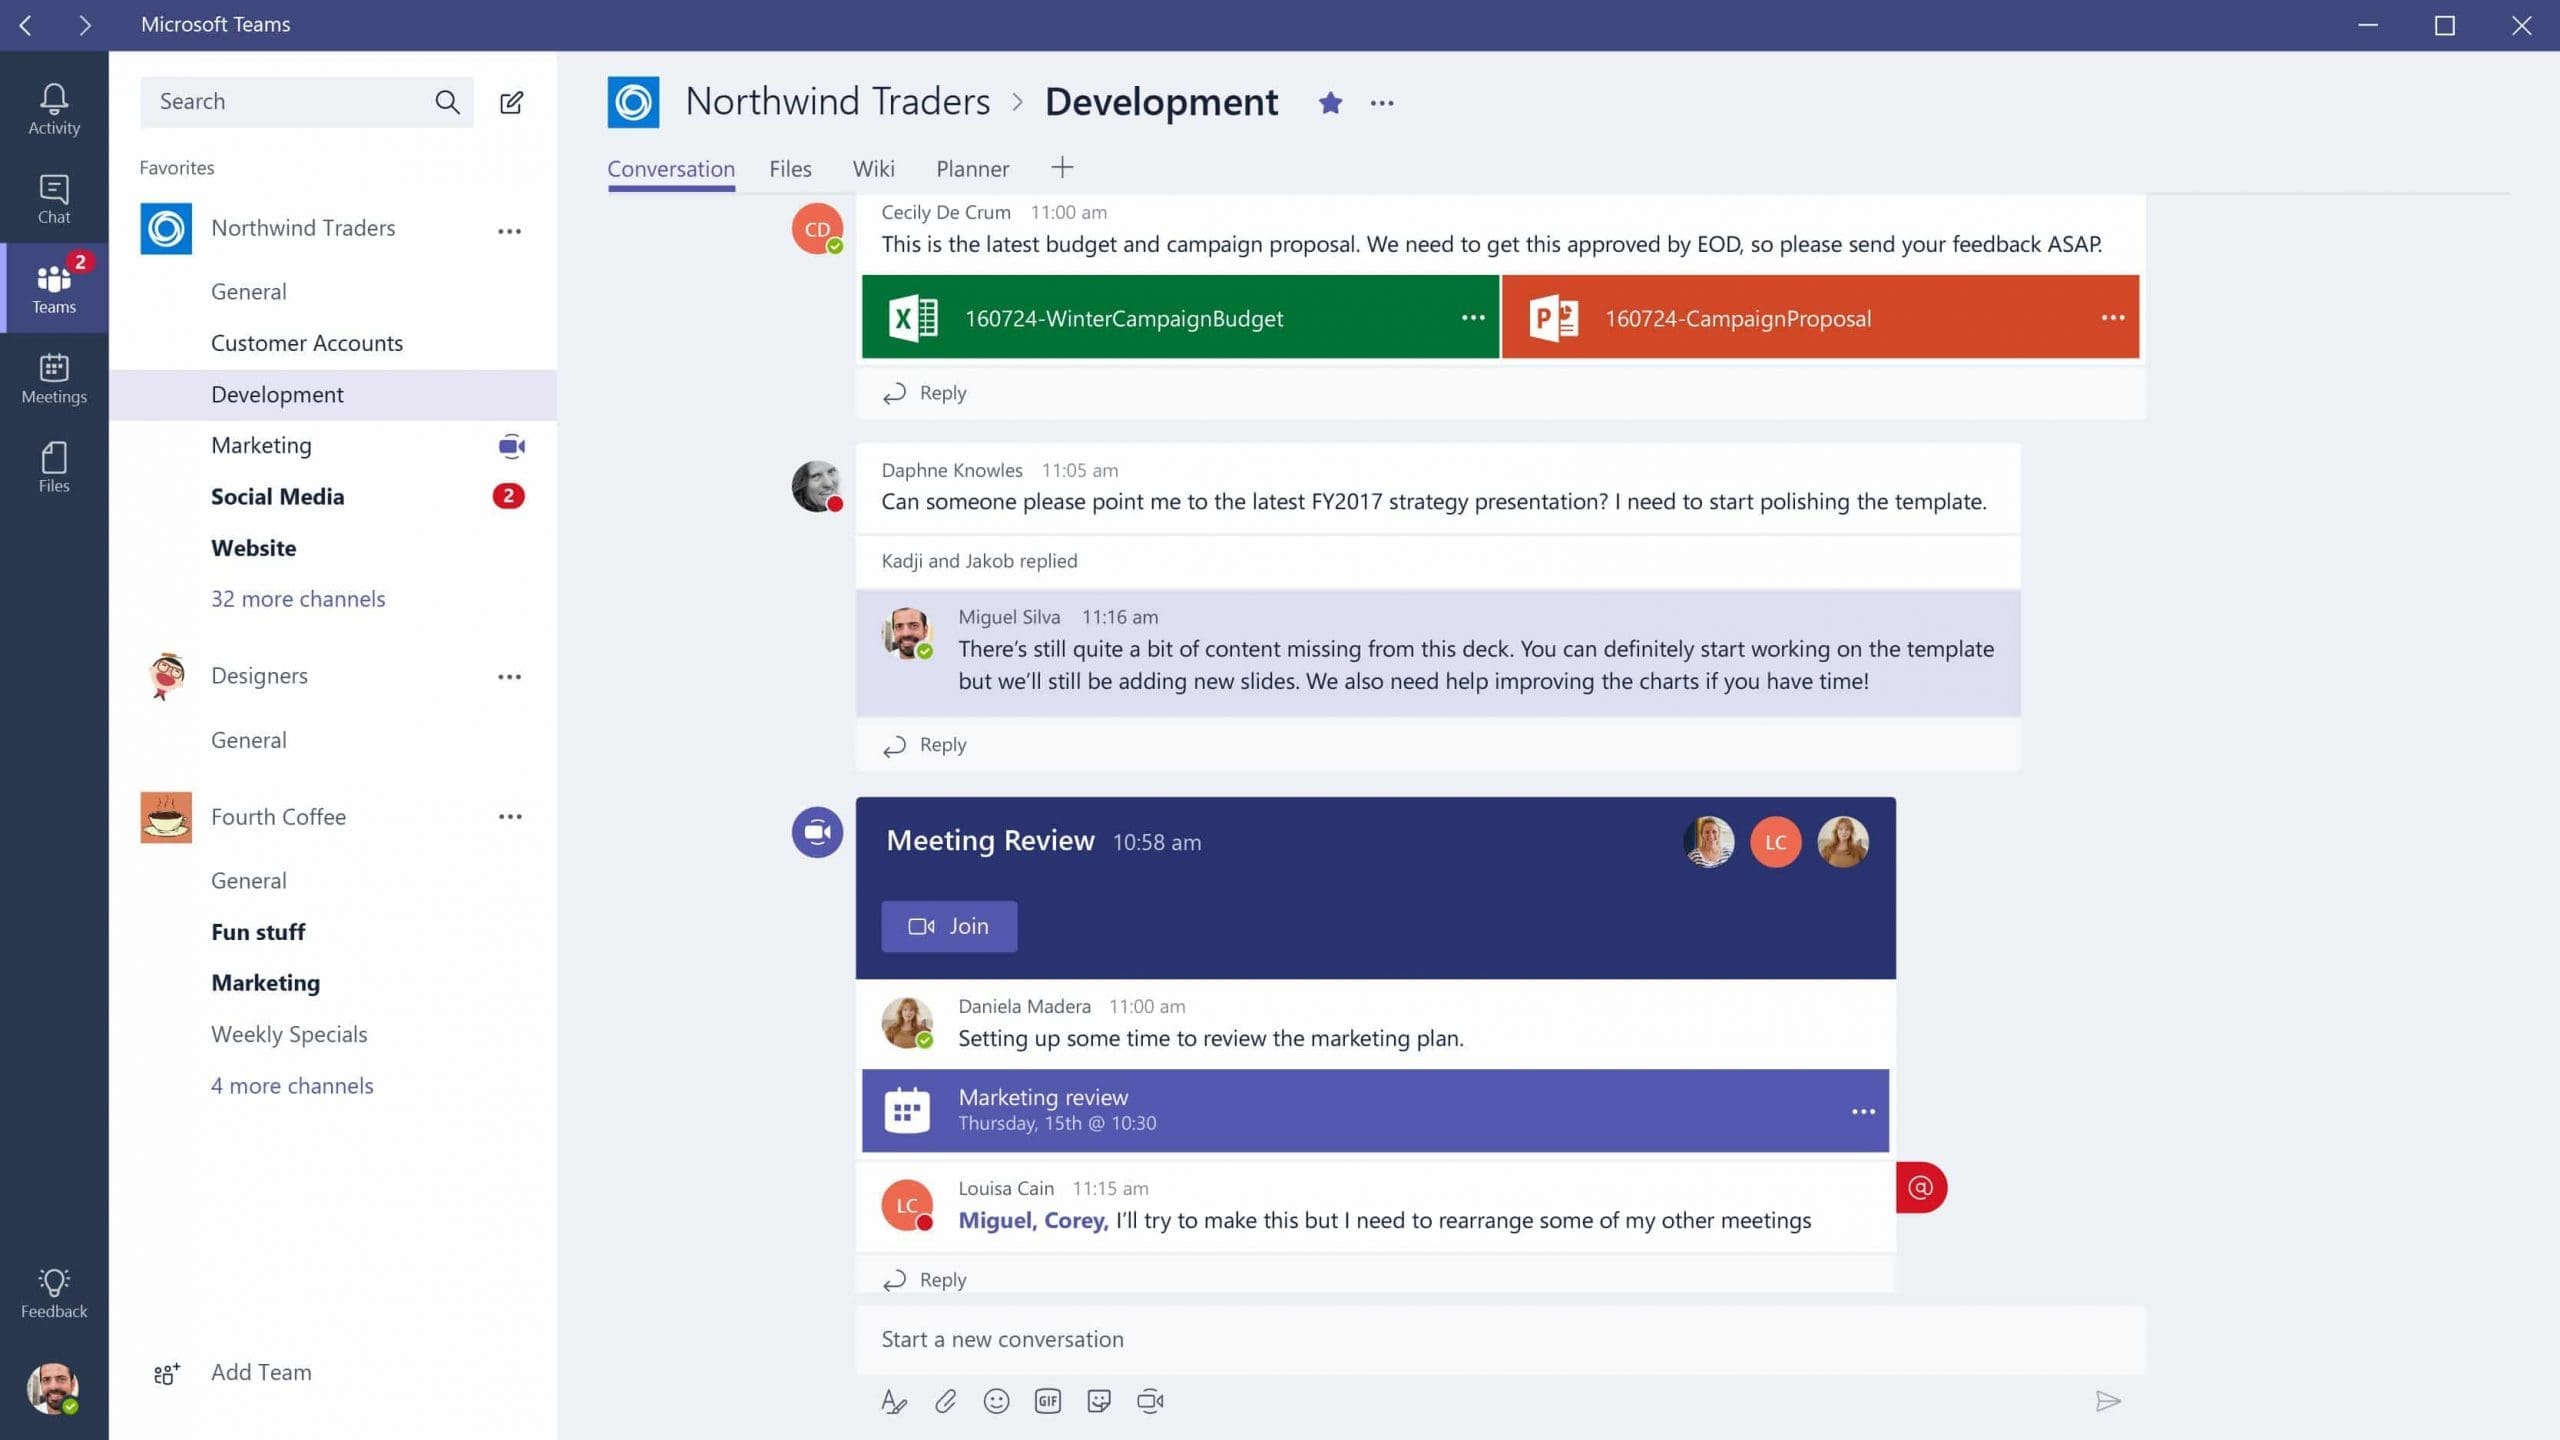 before returning to the office - Microsoft Teams